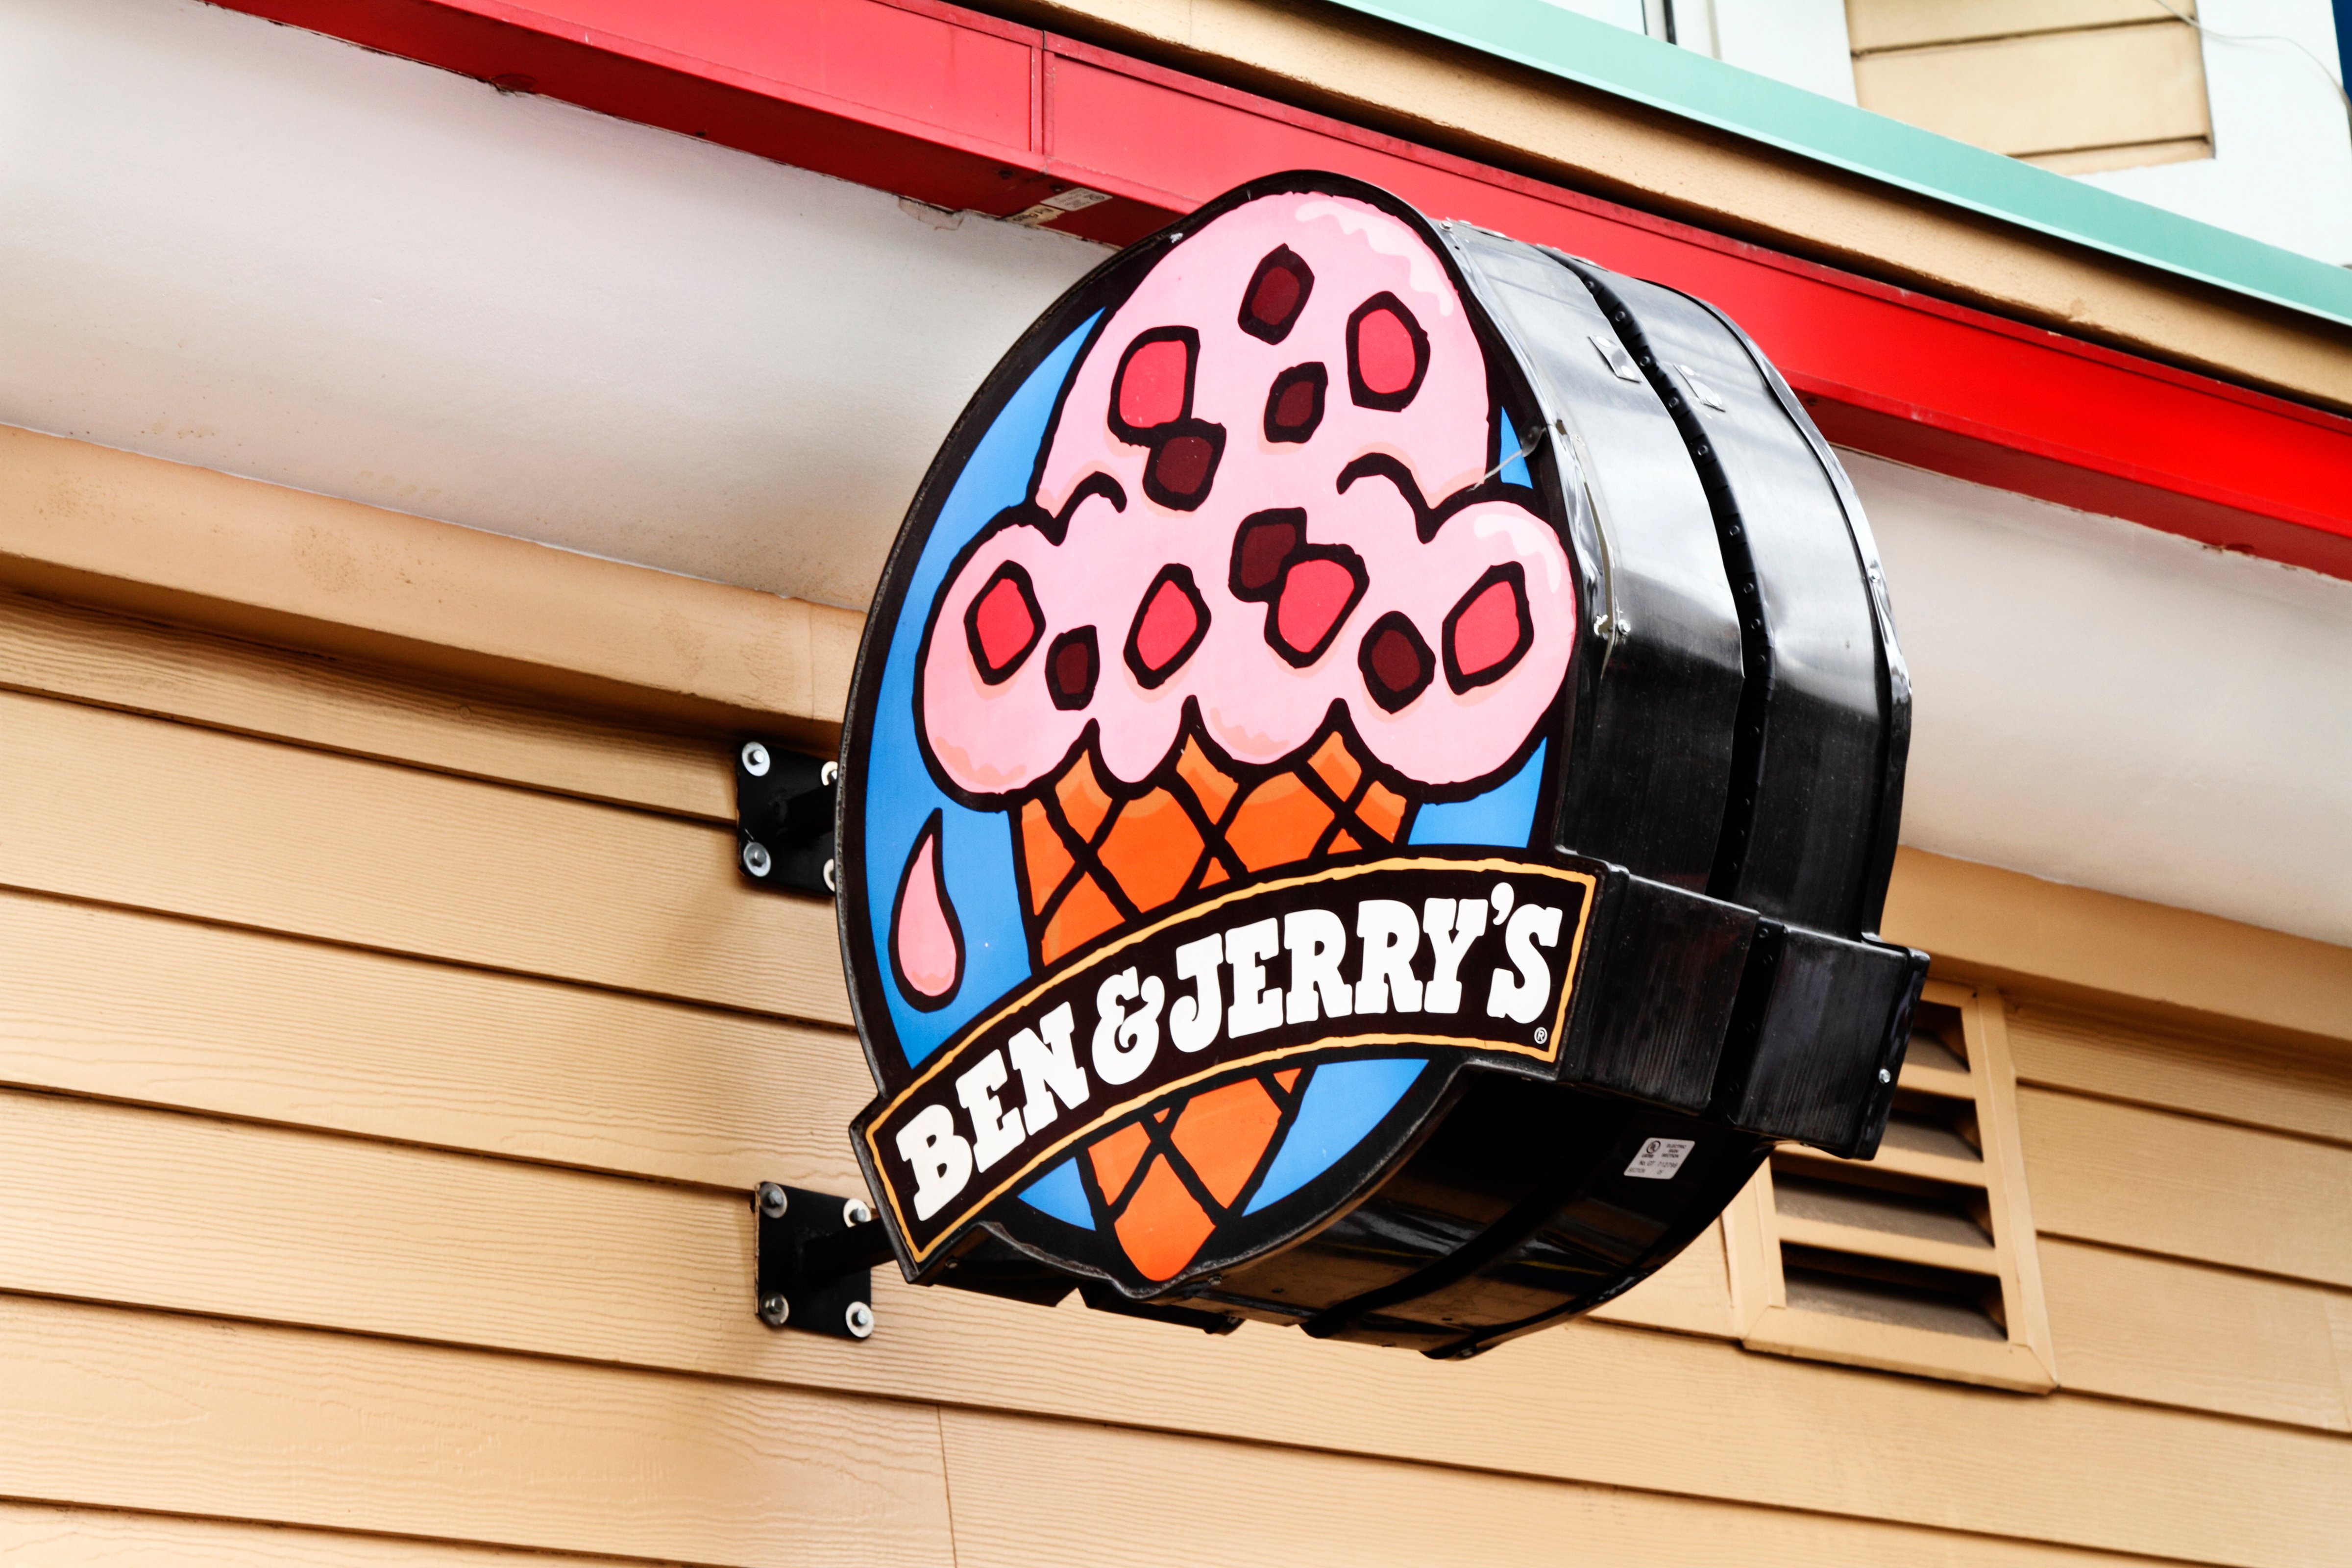 Ben and Jerry's Ice Cream shop sign